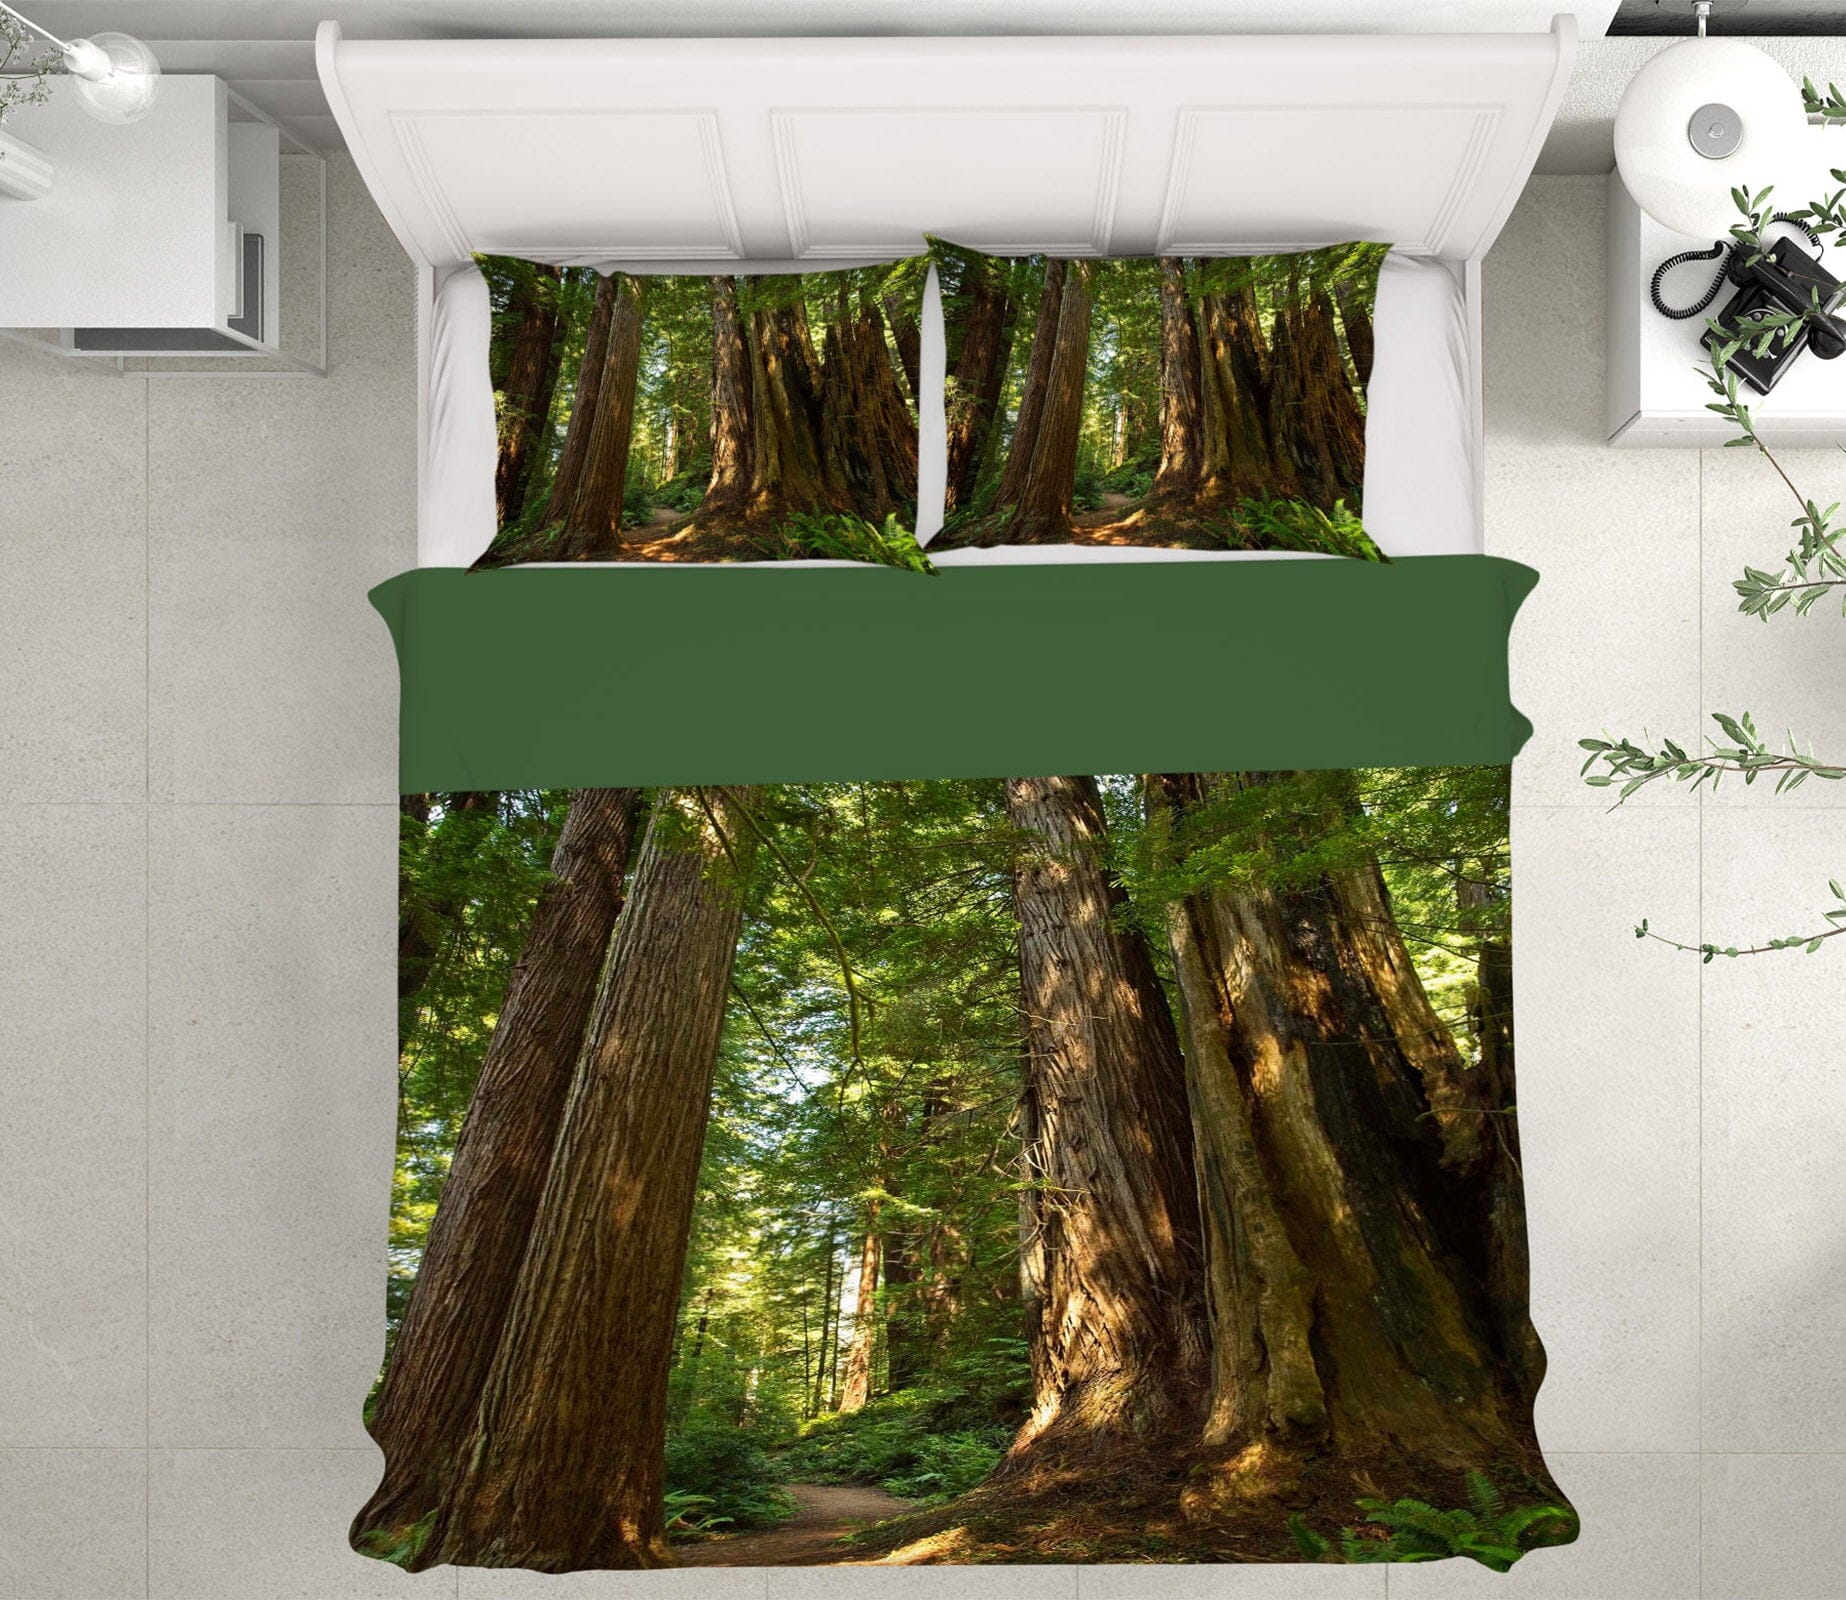 3D Redwood Pathway 2126 Kathy Barefield Bedding Bed Pillowcases Quilt Quiet Covers AJ Creativity Home 